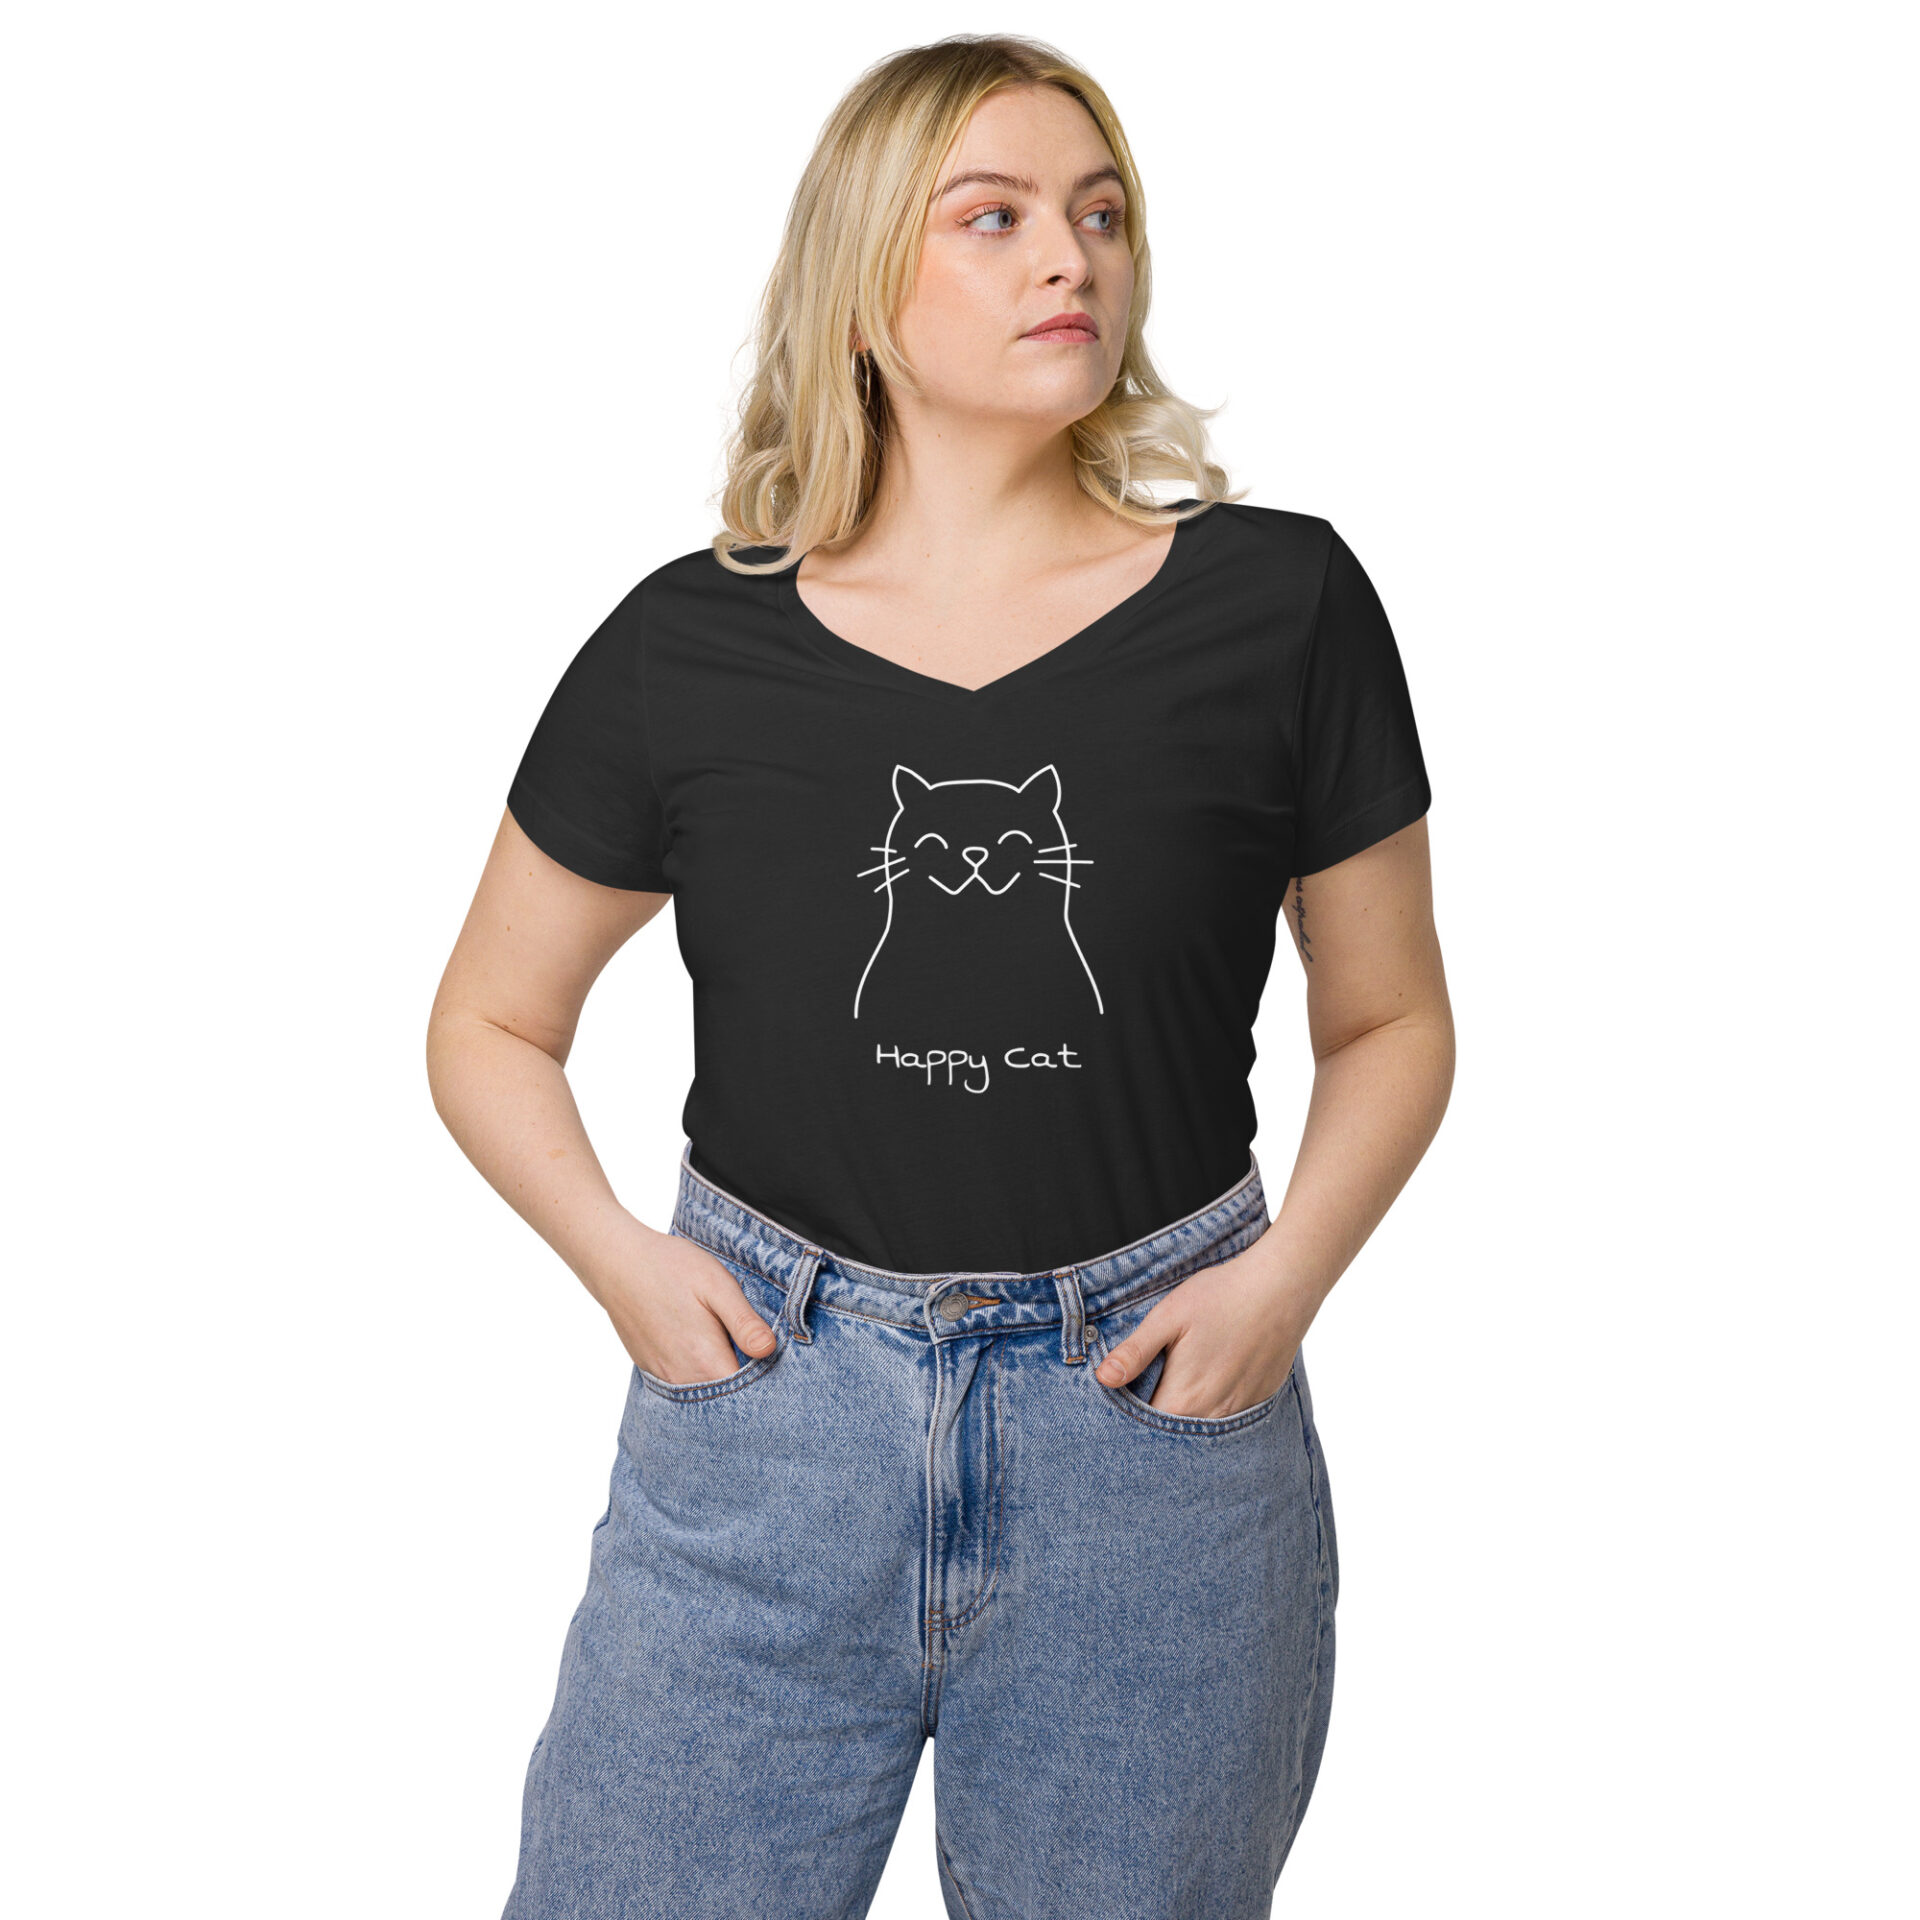 Women’s fitted v-neck t-shirt, “Happy Cat”